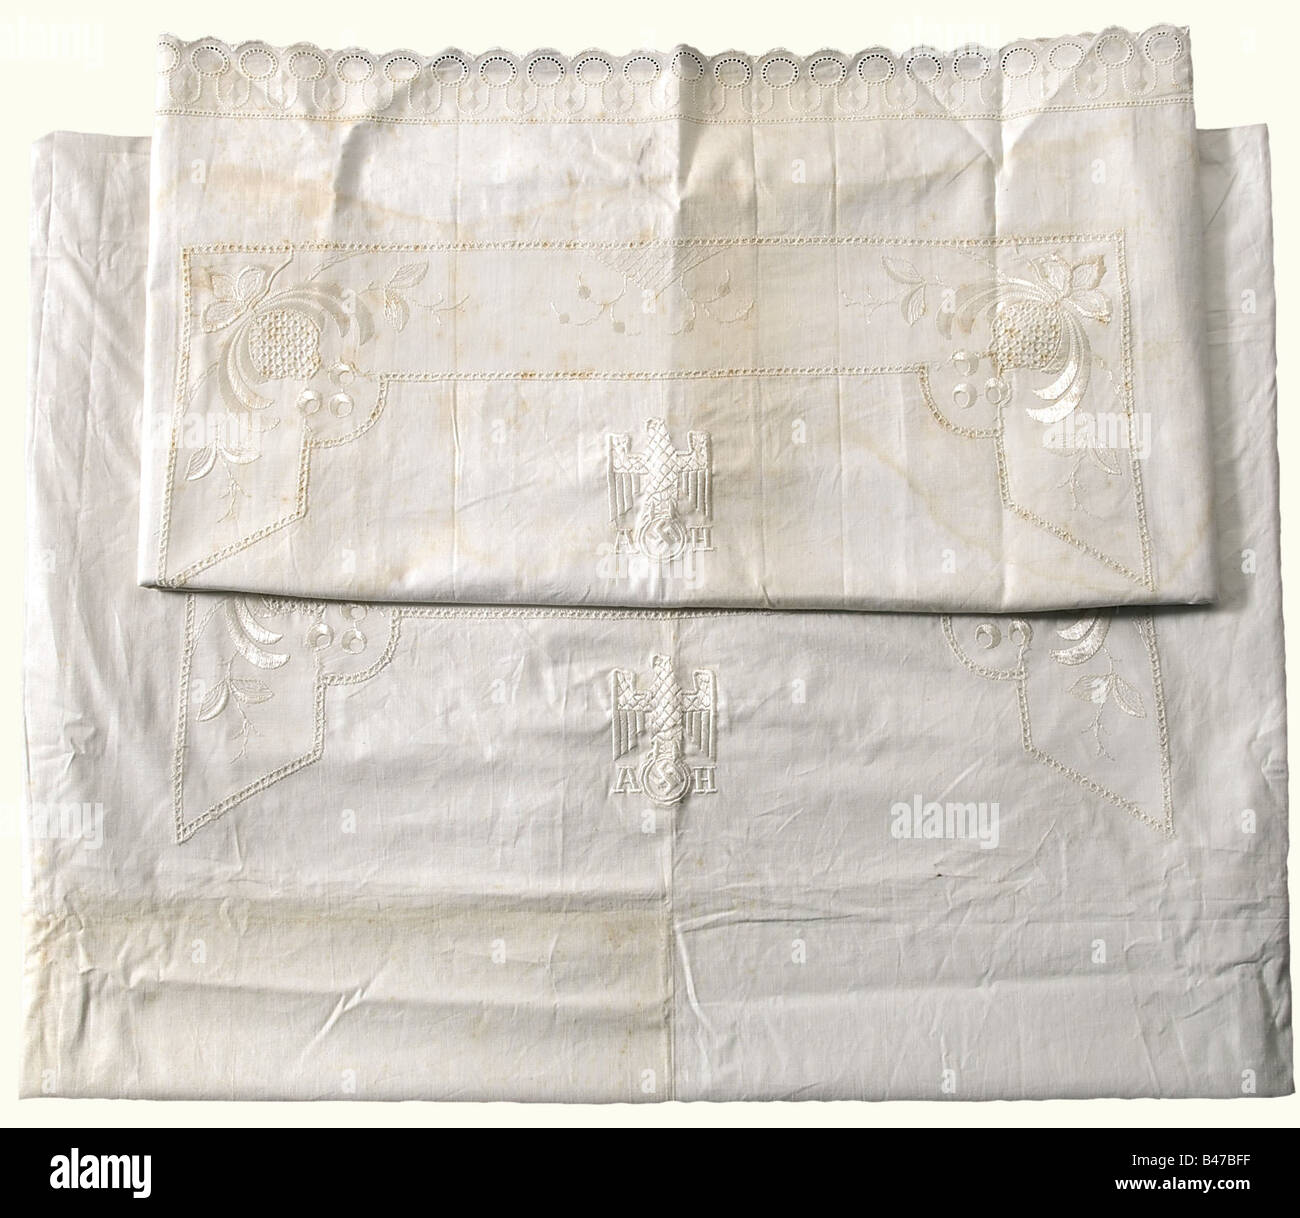 Adolf Hitler, his personal bedclothes Pillow case and duvet cover made as described before with the party eagle embroidered in white silk in the centre of each, flanked by the initials 'A' and 'H'. Ca. 75 x 75 and 120 x 175 cm respectively. Undamaged, (mould-)stained in places. historic, historical, 1930s, 1930s, 20th century, NS, National Socialism, Nazism, Third Reich, German Reich, Germany, German, National Socialist, Nazi, Nazi period, fascism, fine arts, art, art object, art objects, artful, precious, collectible, collector's item, collectibles, collector', Stock Photo